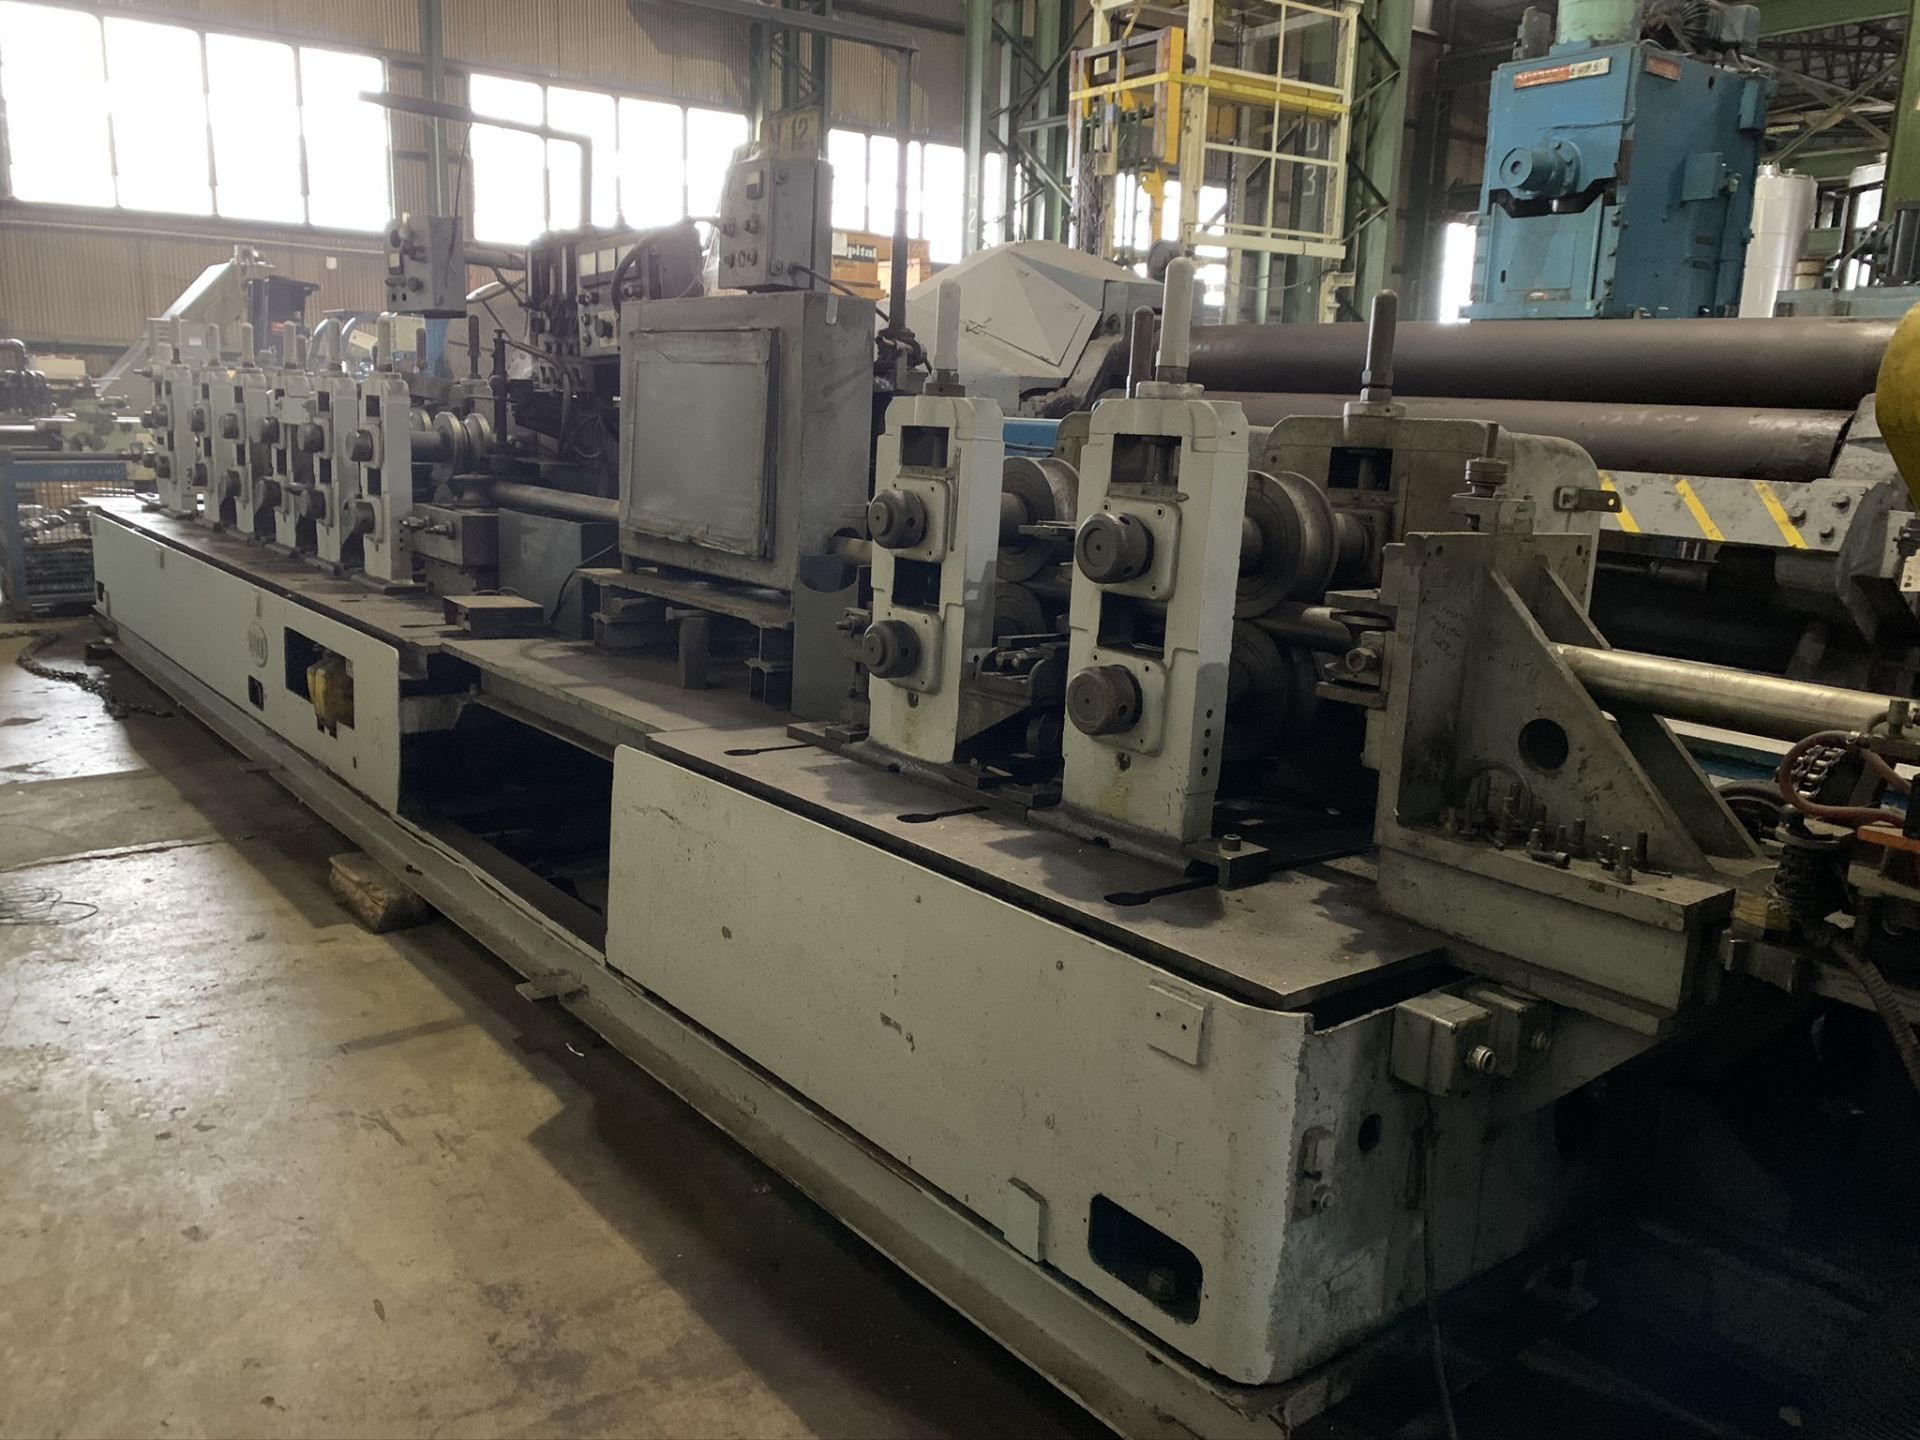 YODER MODEL M3 TUBE MILL; S/N 39774 68259-1, 9-STAND 7-DRIVEN FORMING STANDS, (2) SIZING STANDS,